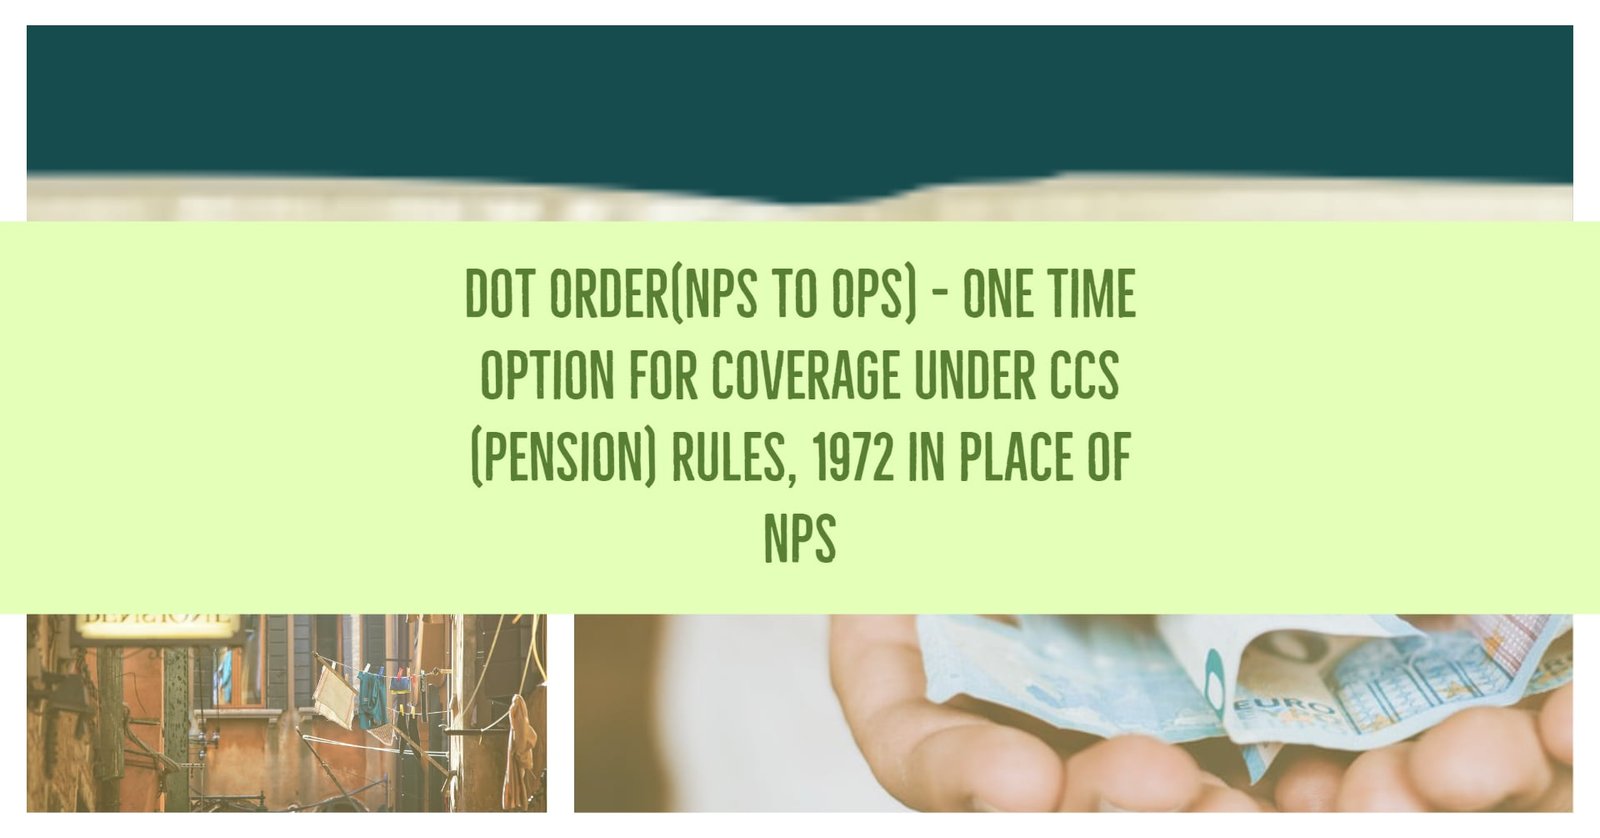 DoT Order(NPS to OPS) - One time option for Coverage under CCS (Pension) Rules, 1972 in place of NPS